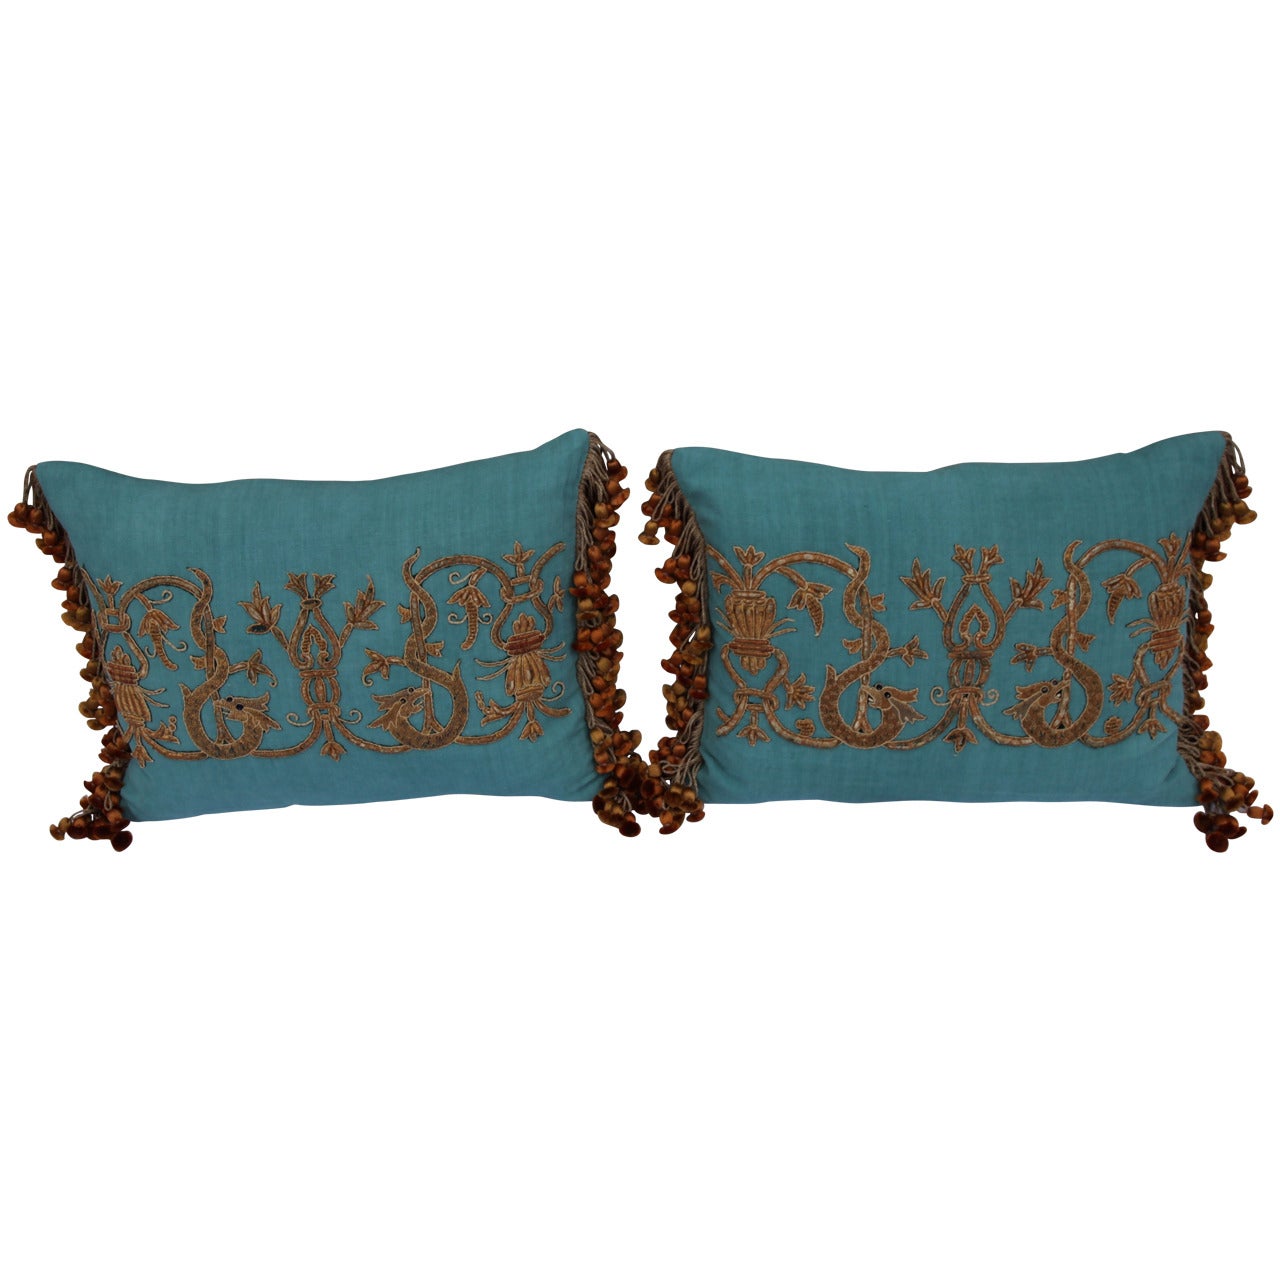 Pair of Appliqued Turquoise Linen Pillows